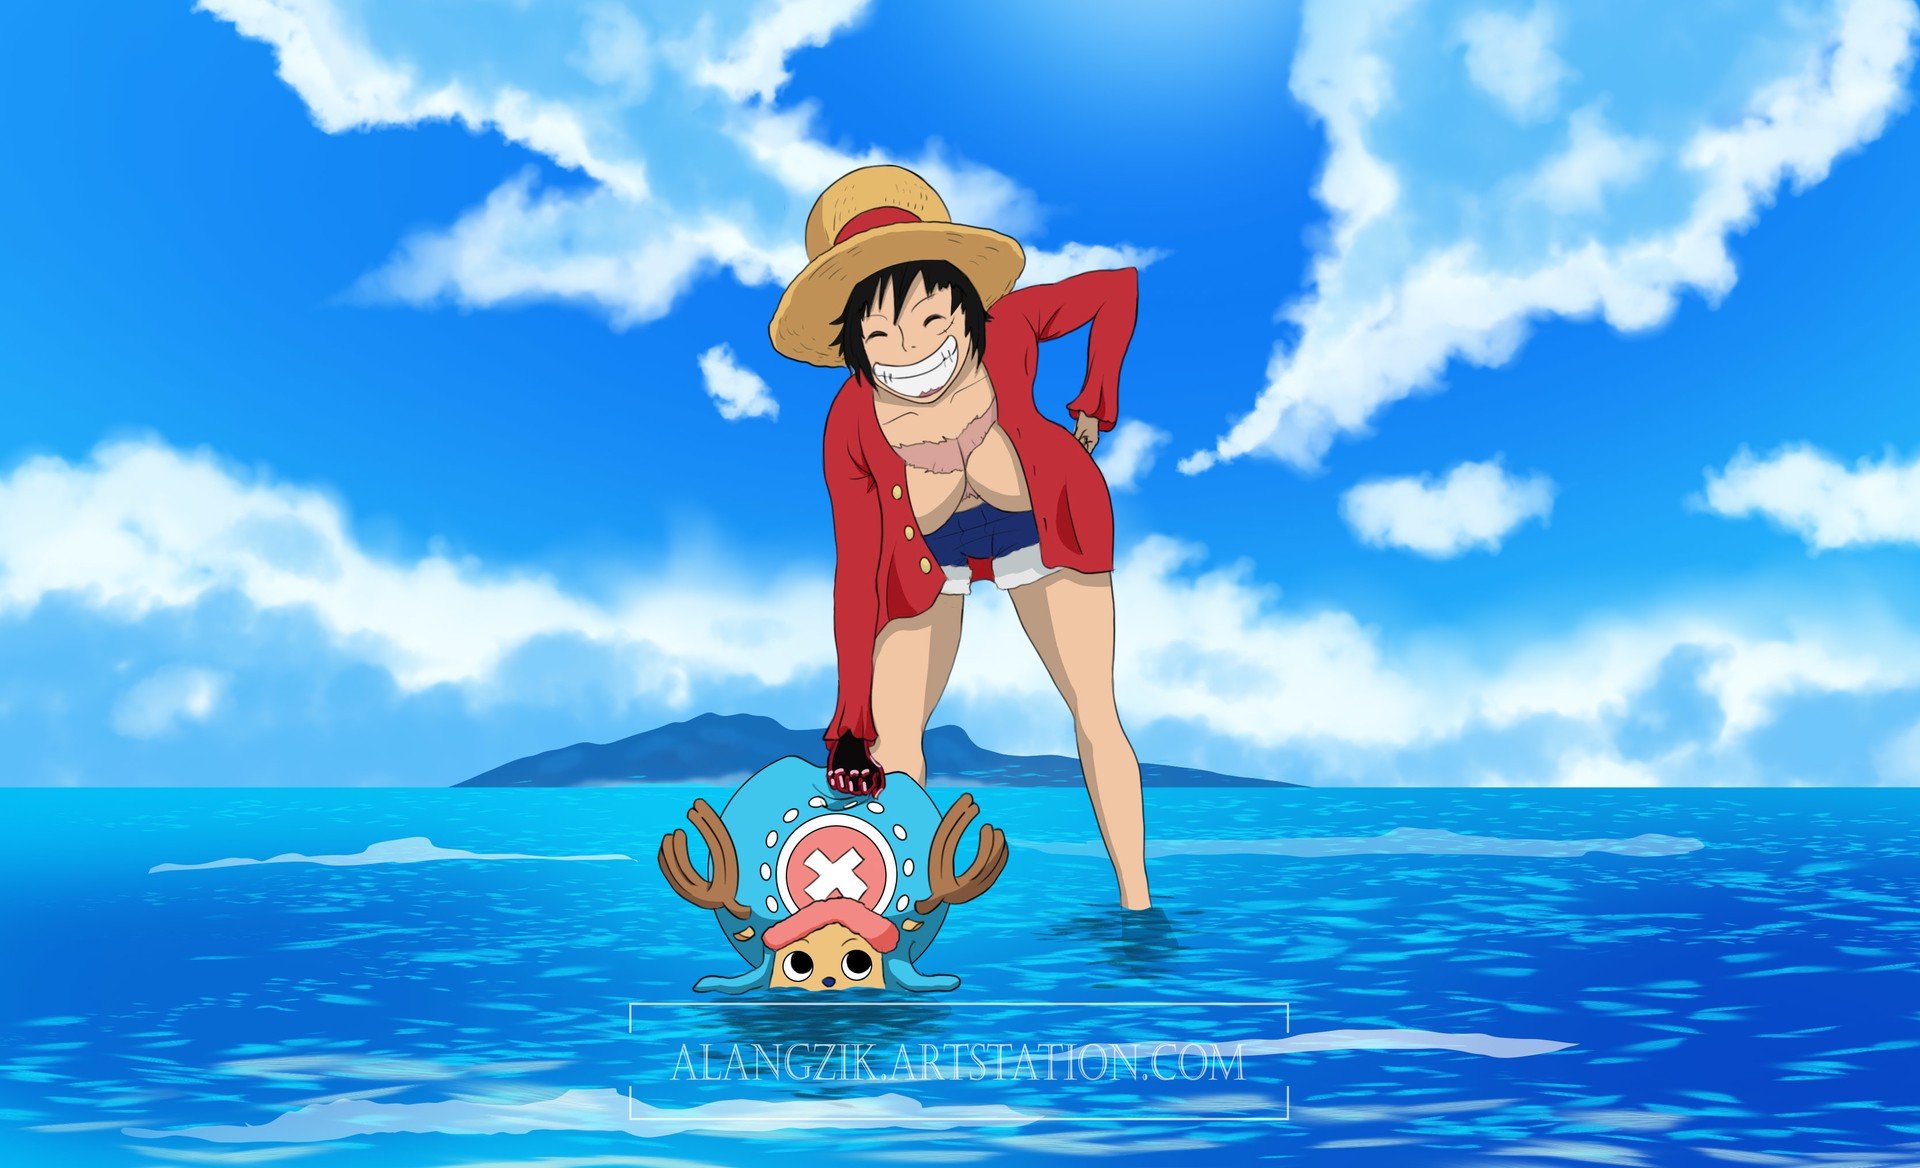 Cursed luffy images